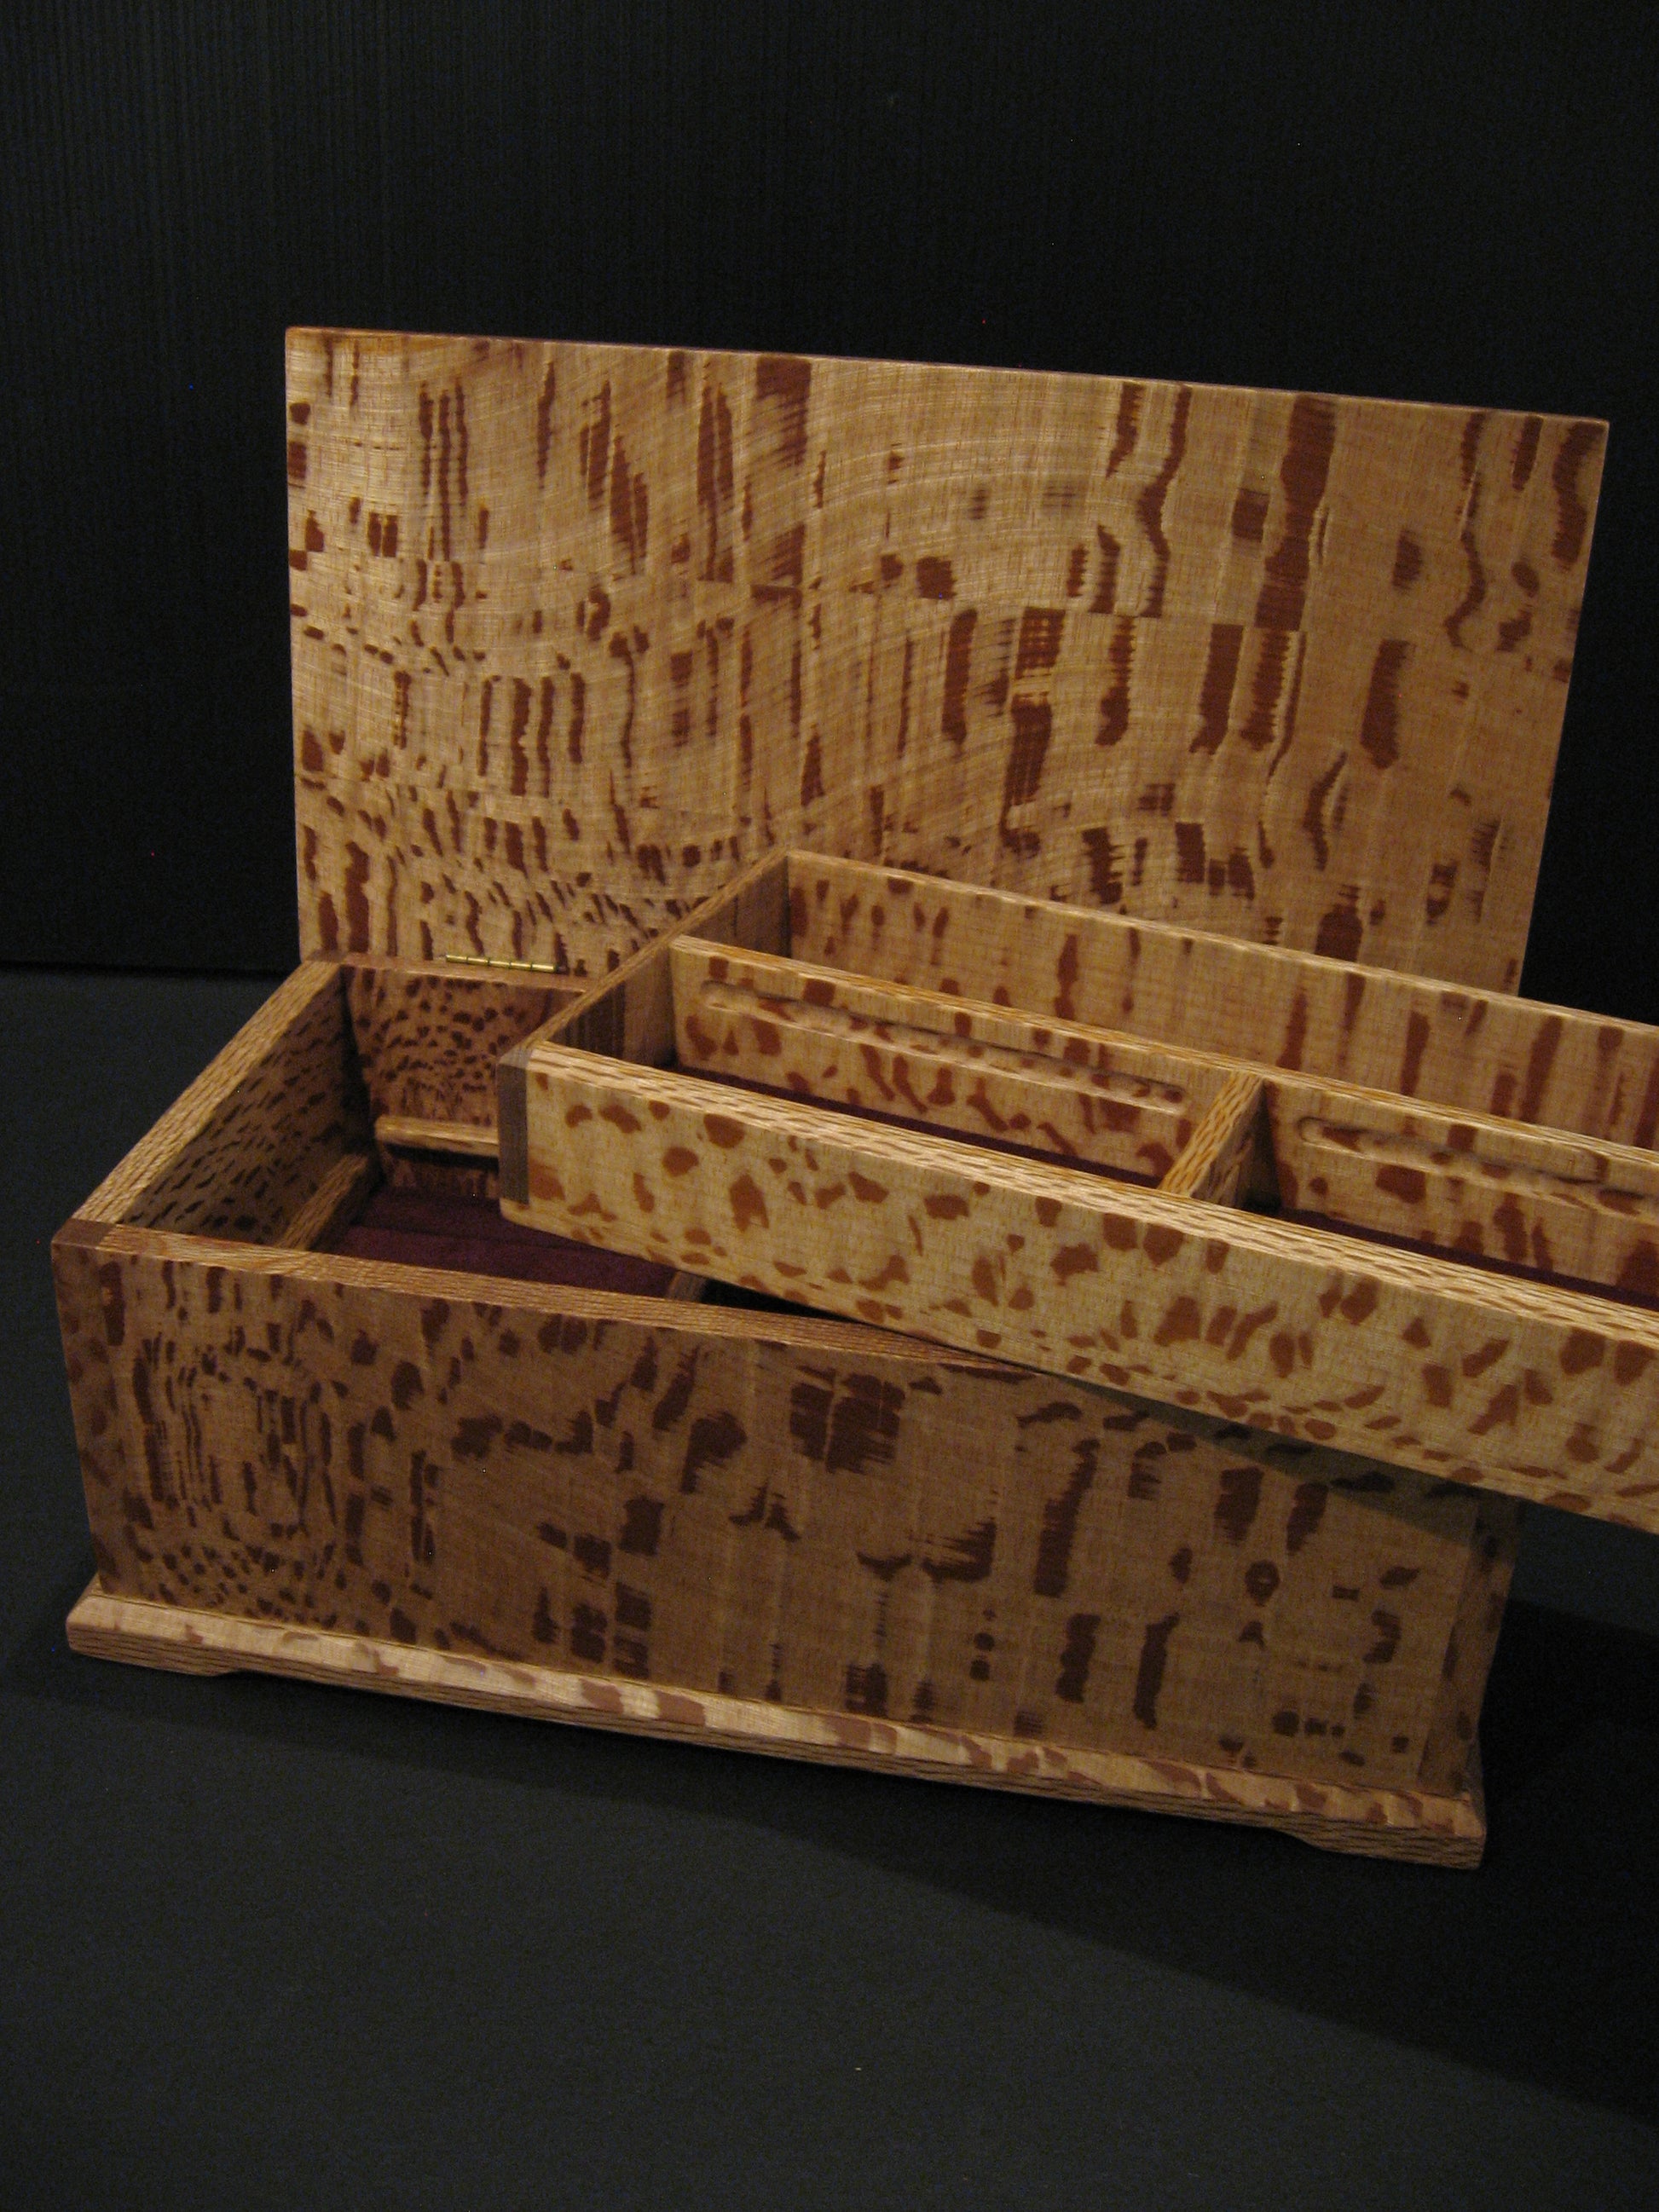 Inside Deluxe Rewarewa Wooden Jewellery Box by Timber Arts formerly Sovereign Woodware NZ Silver Fern Gallery